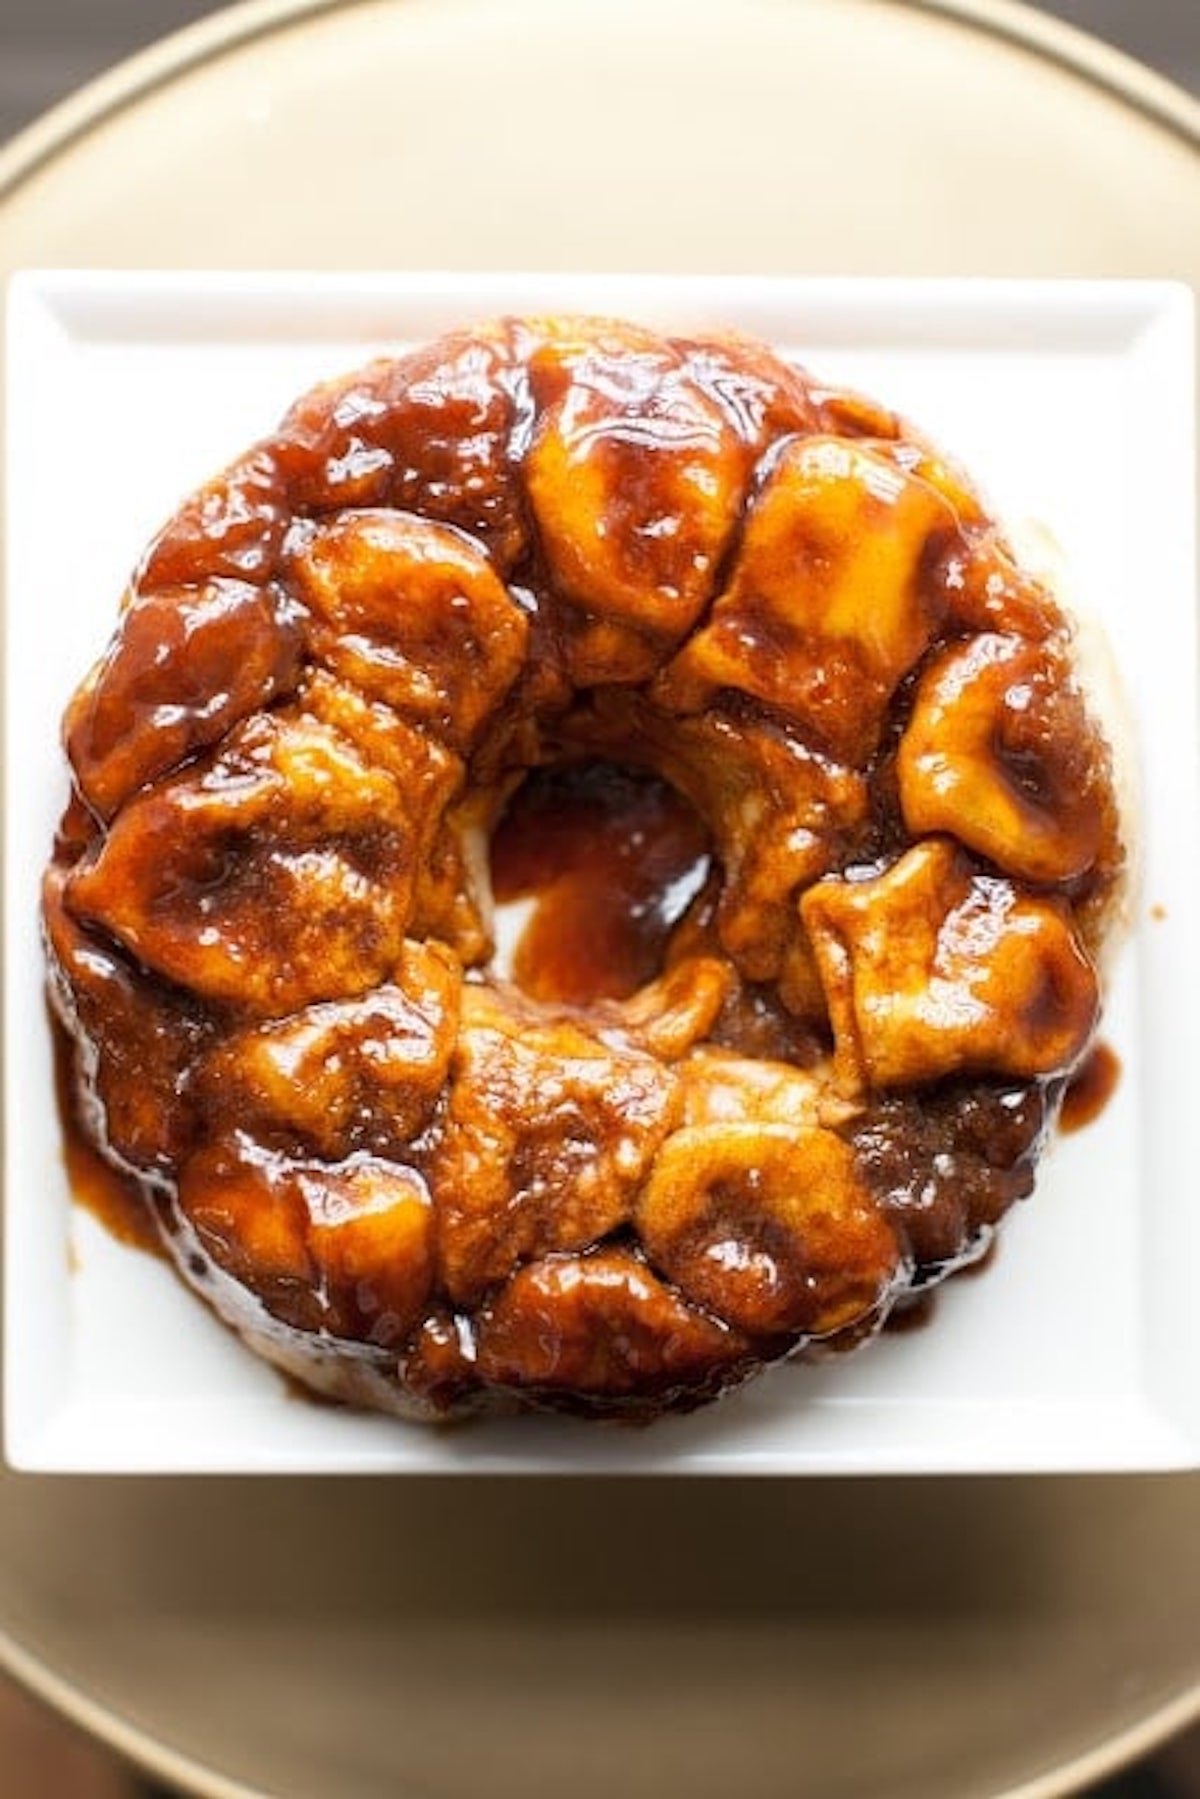 Close-up of a round sticky overnight monkey bread on a white plate, showing pieces of baked dough coated in caramelized sugar.